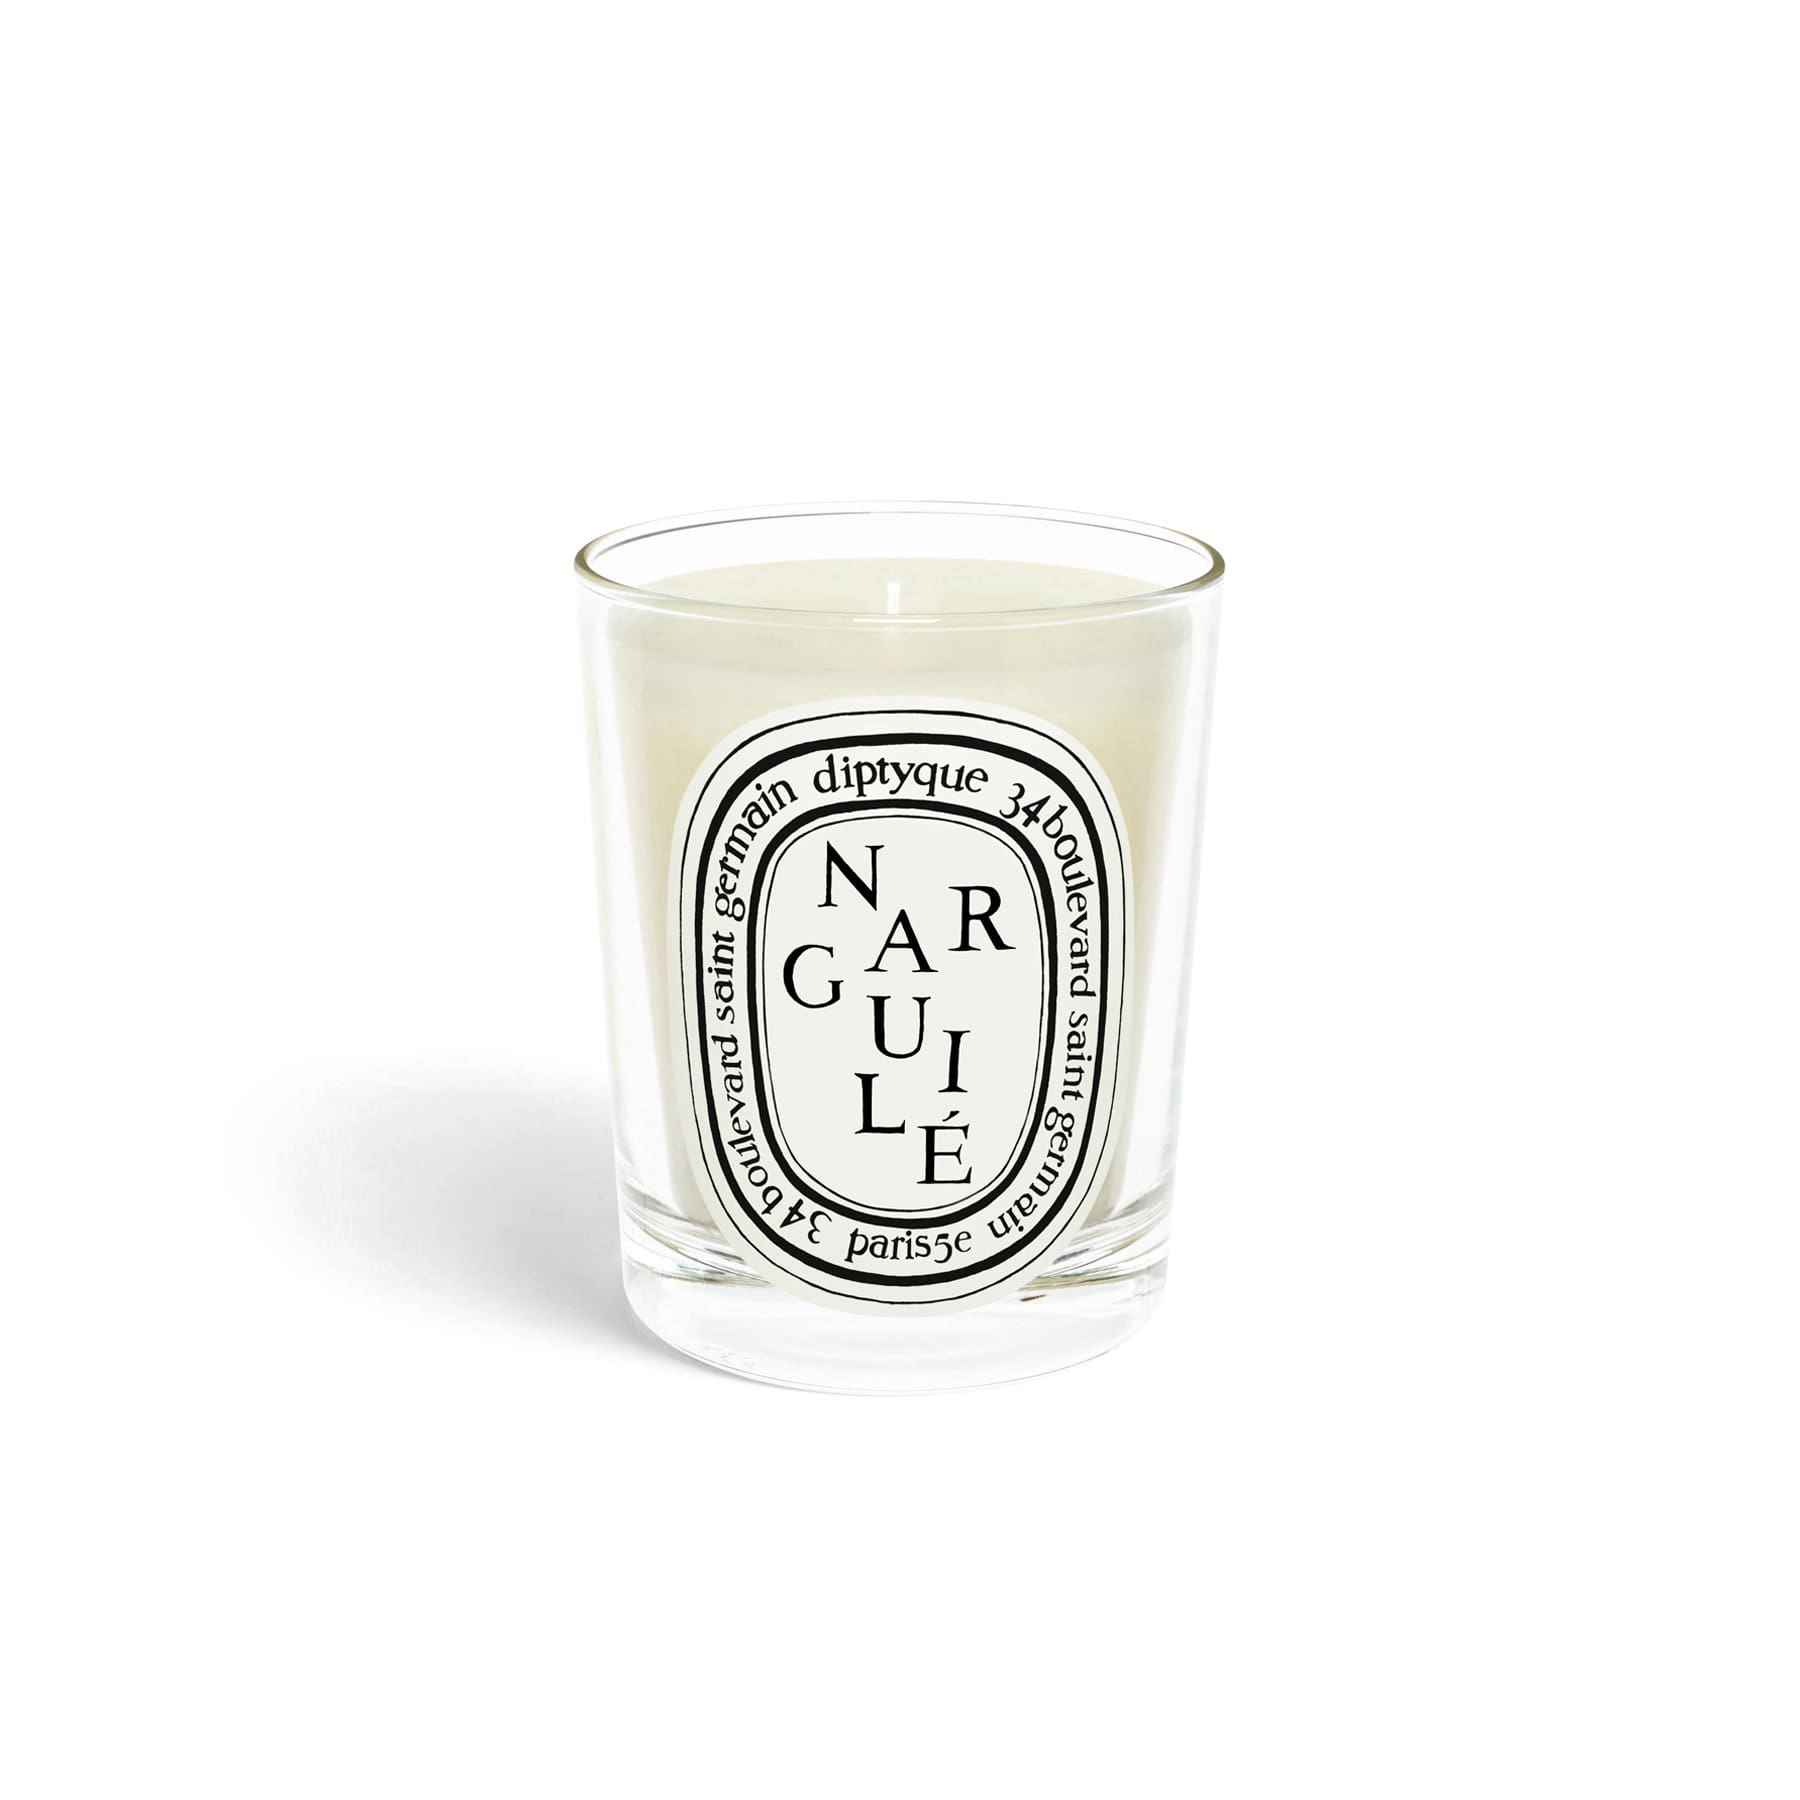 Narguilé Diptyque Candle scented candle